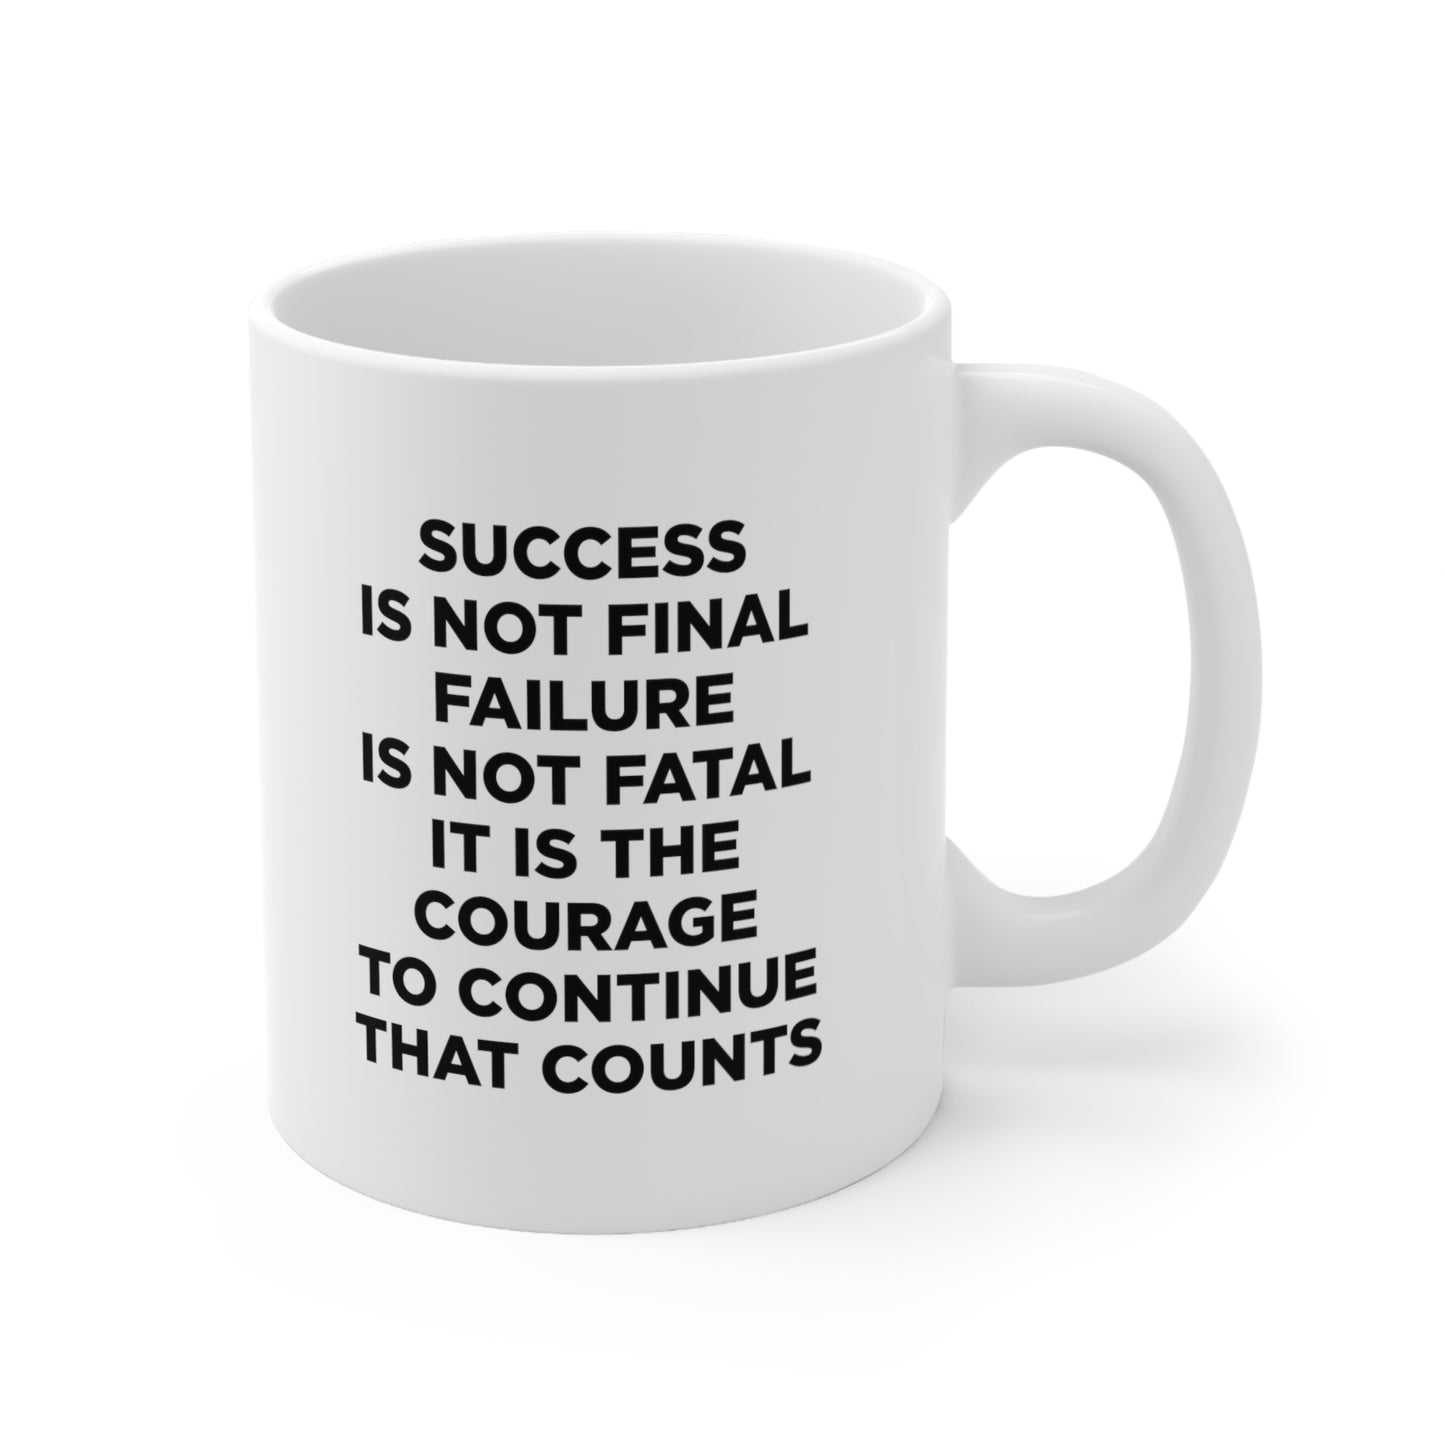 Success is not final failure is not fatal It is the courage to continue that counts Mug 11oz